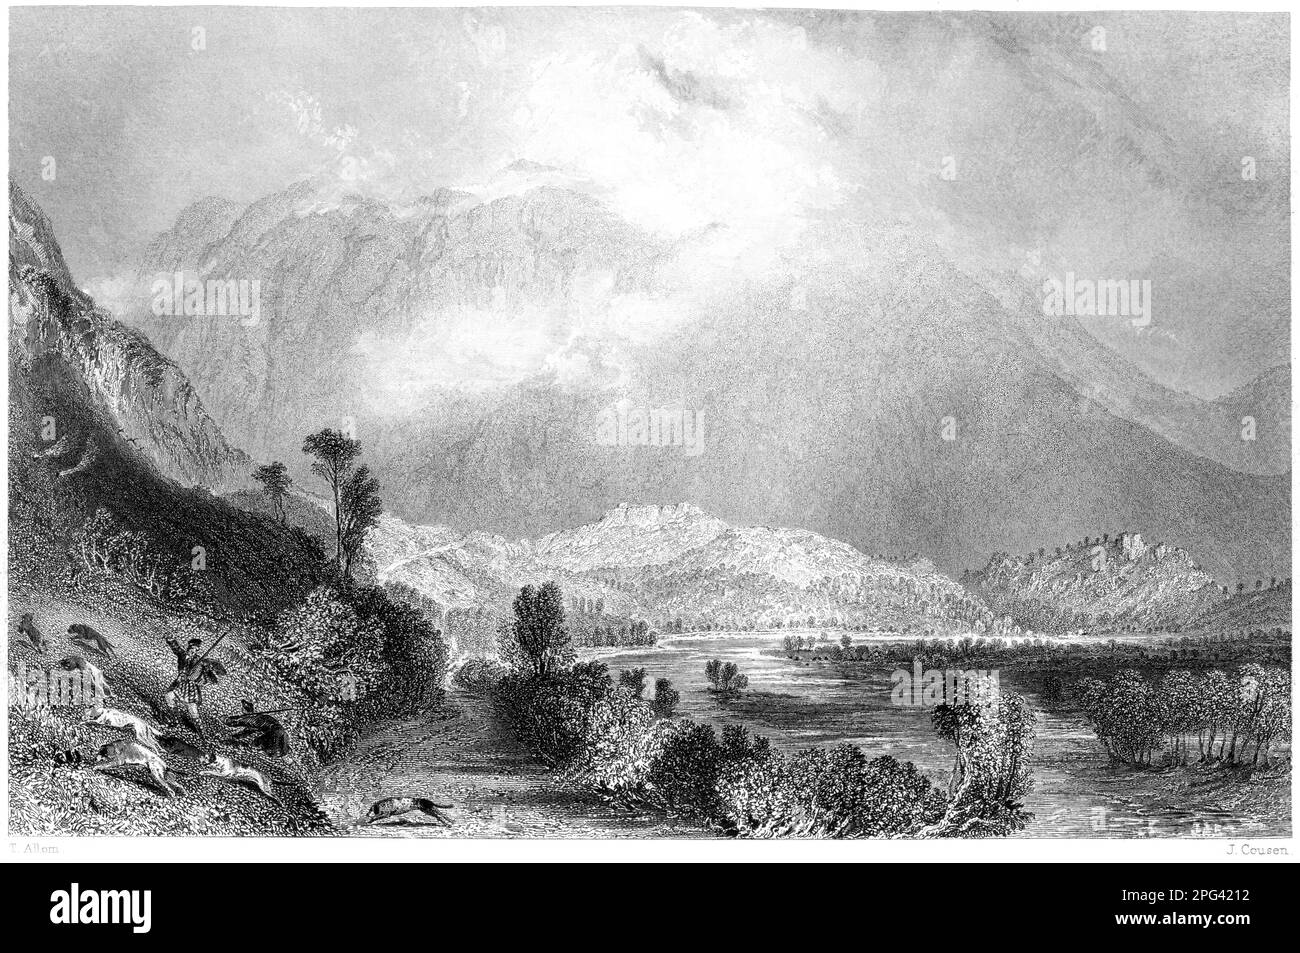 An engraving of Glencoe from the west, West Highlands, Scotland UK scanned at high resolution from a book printed in 1840. Stock Photo